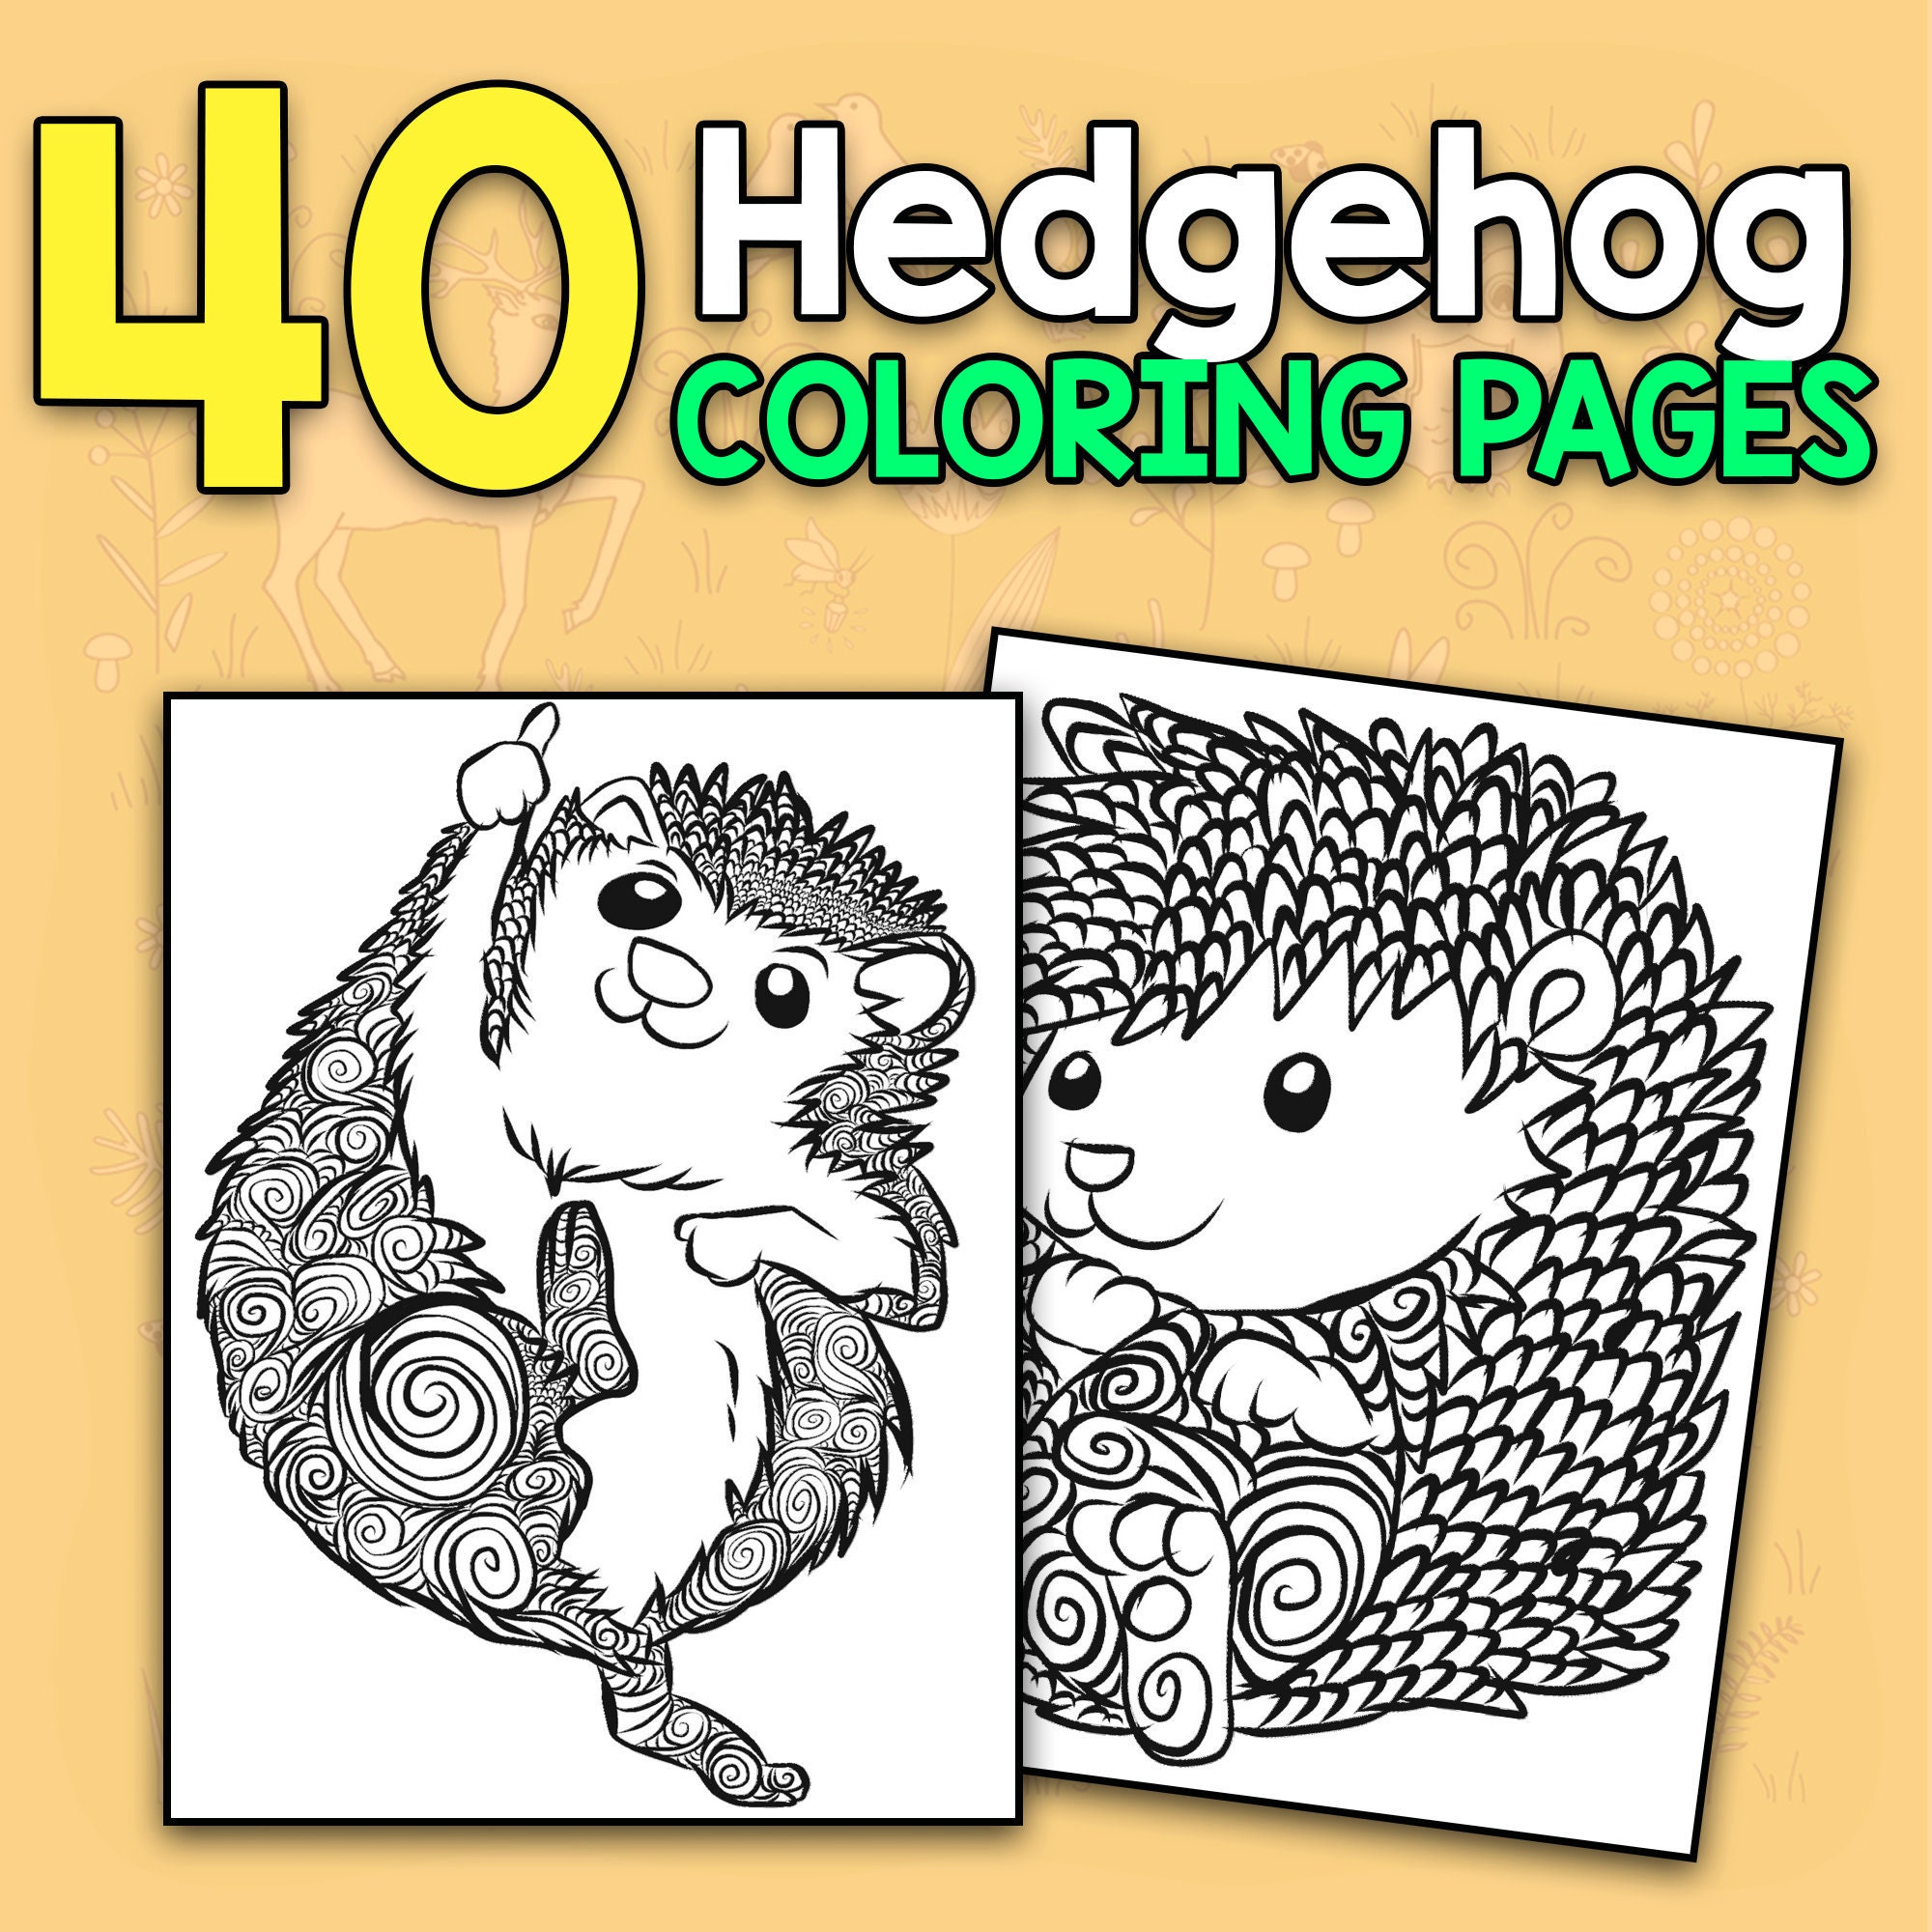 Hedgehog Coloring Book for Adults: Cute Hedgehogs Designs - Easy Stress Relieving Adult Coloring Book [Book]